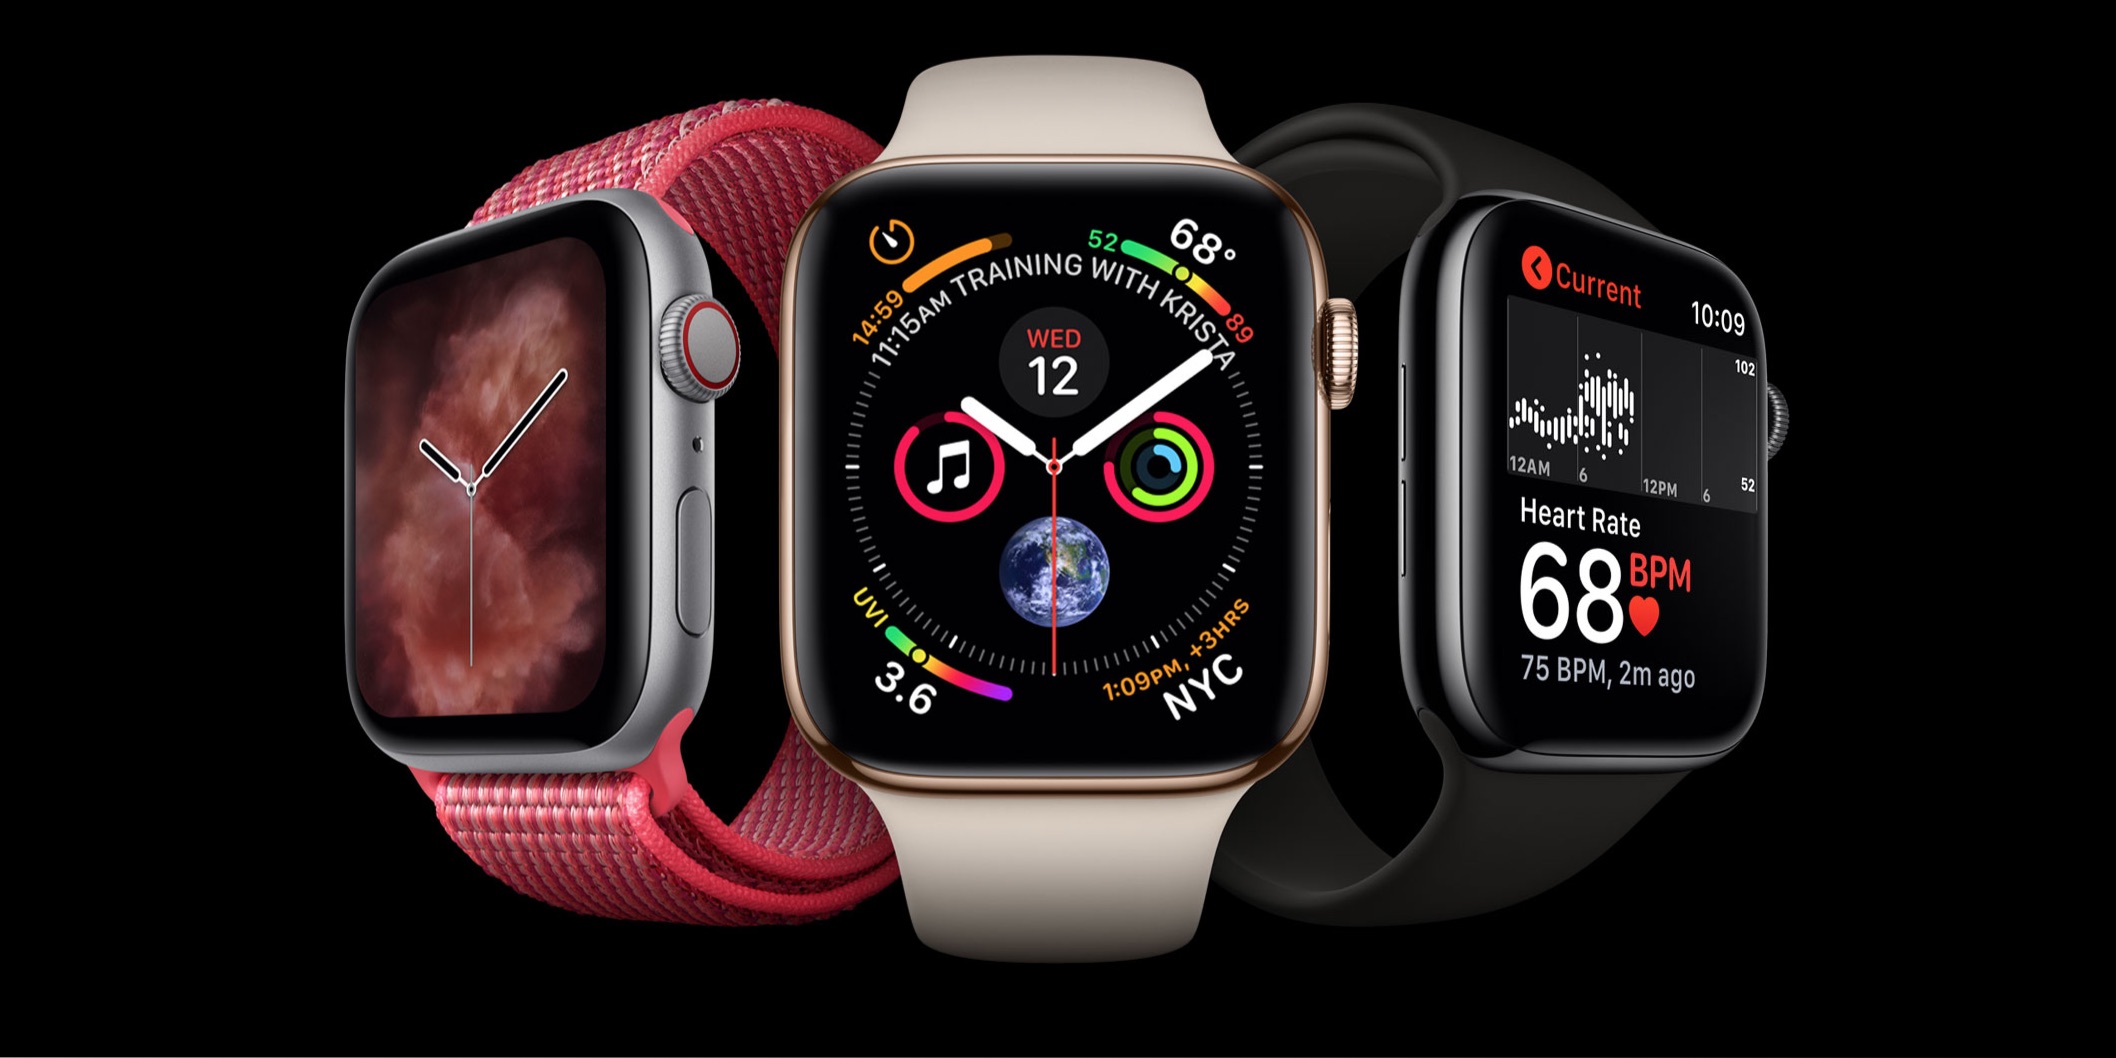 Apple Watch Series 4 with cellular continues international rollout